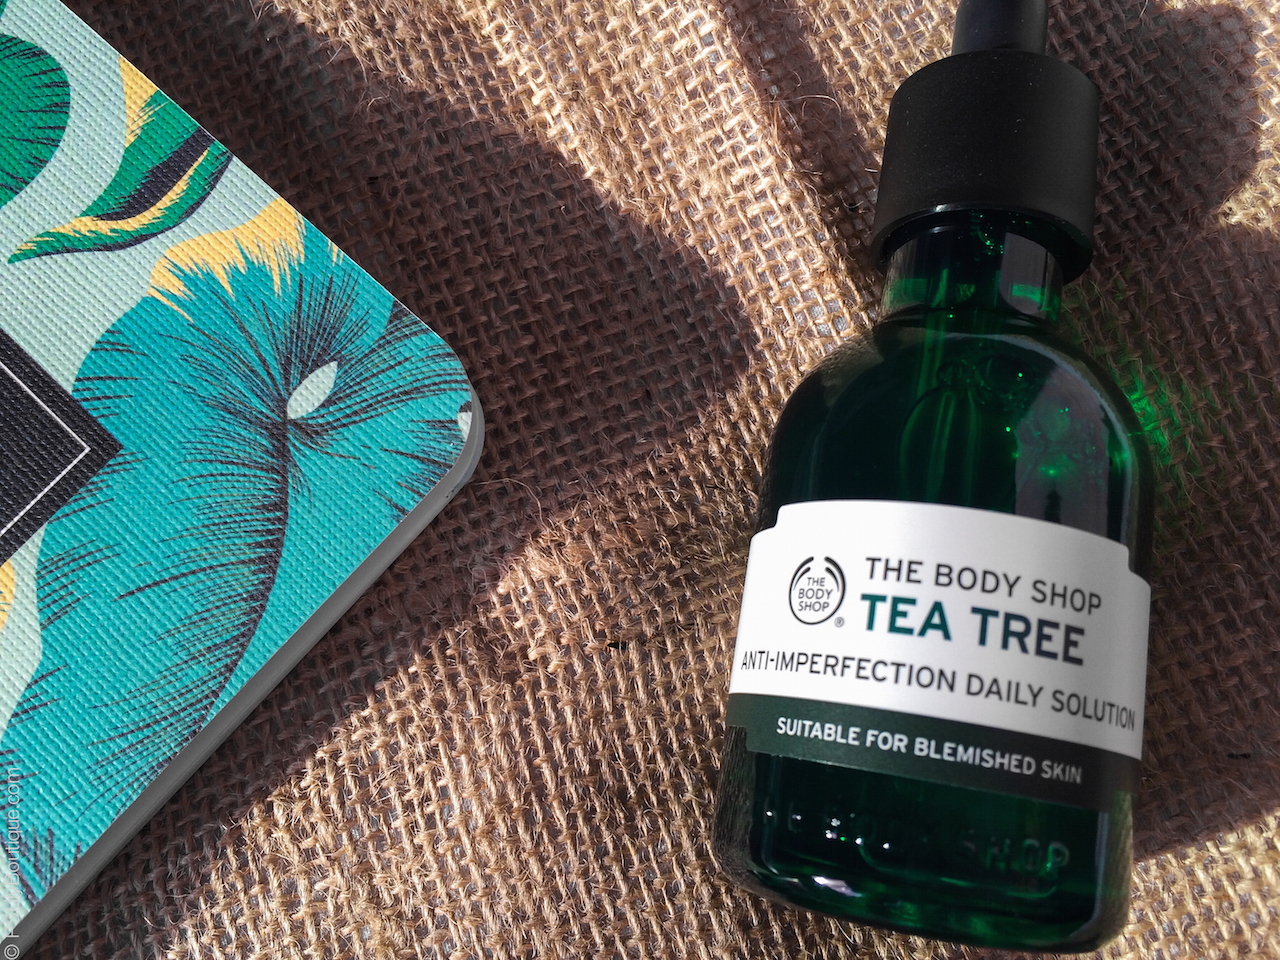 instagram-pslilyboutique-la-fashion-blogger-top-the-body-shop-tea-tree-anti-imperfection-daily-solution-face-serum-vegan-beauty-skin-care-collaboration-summer-8-29-16